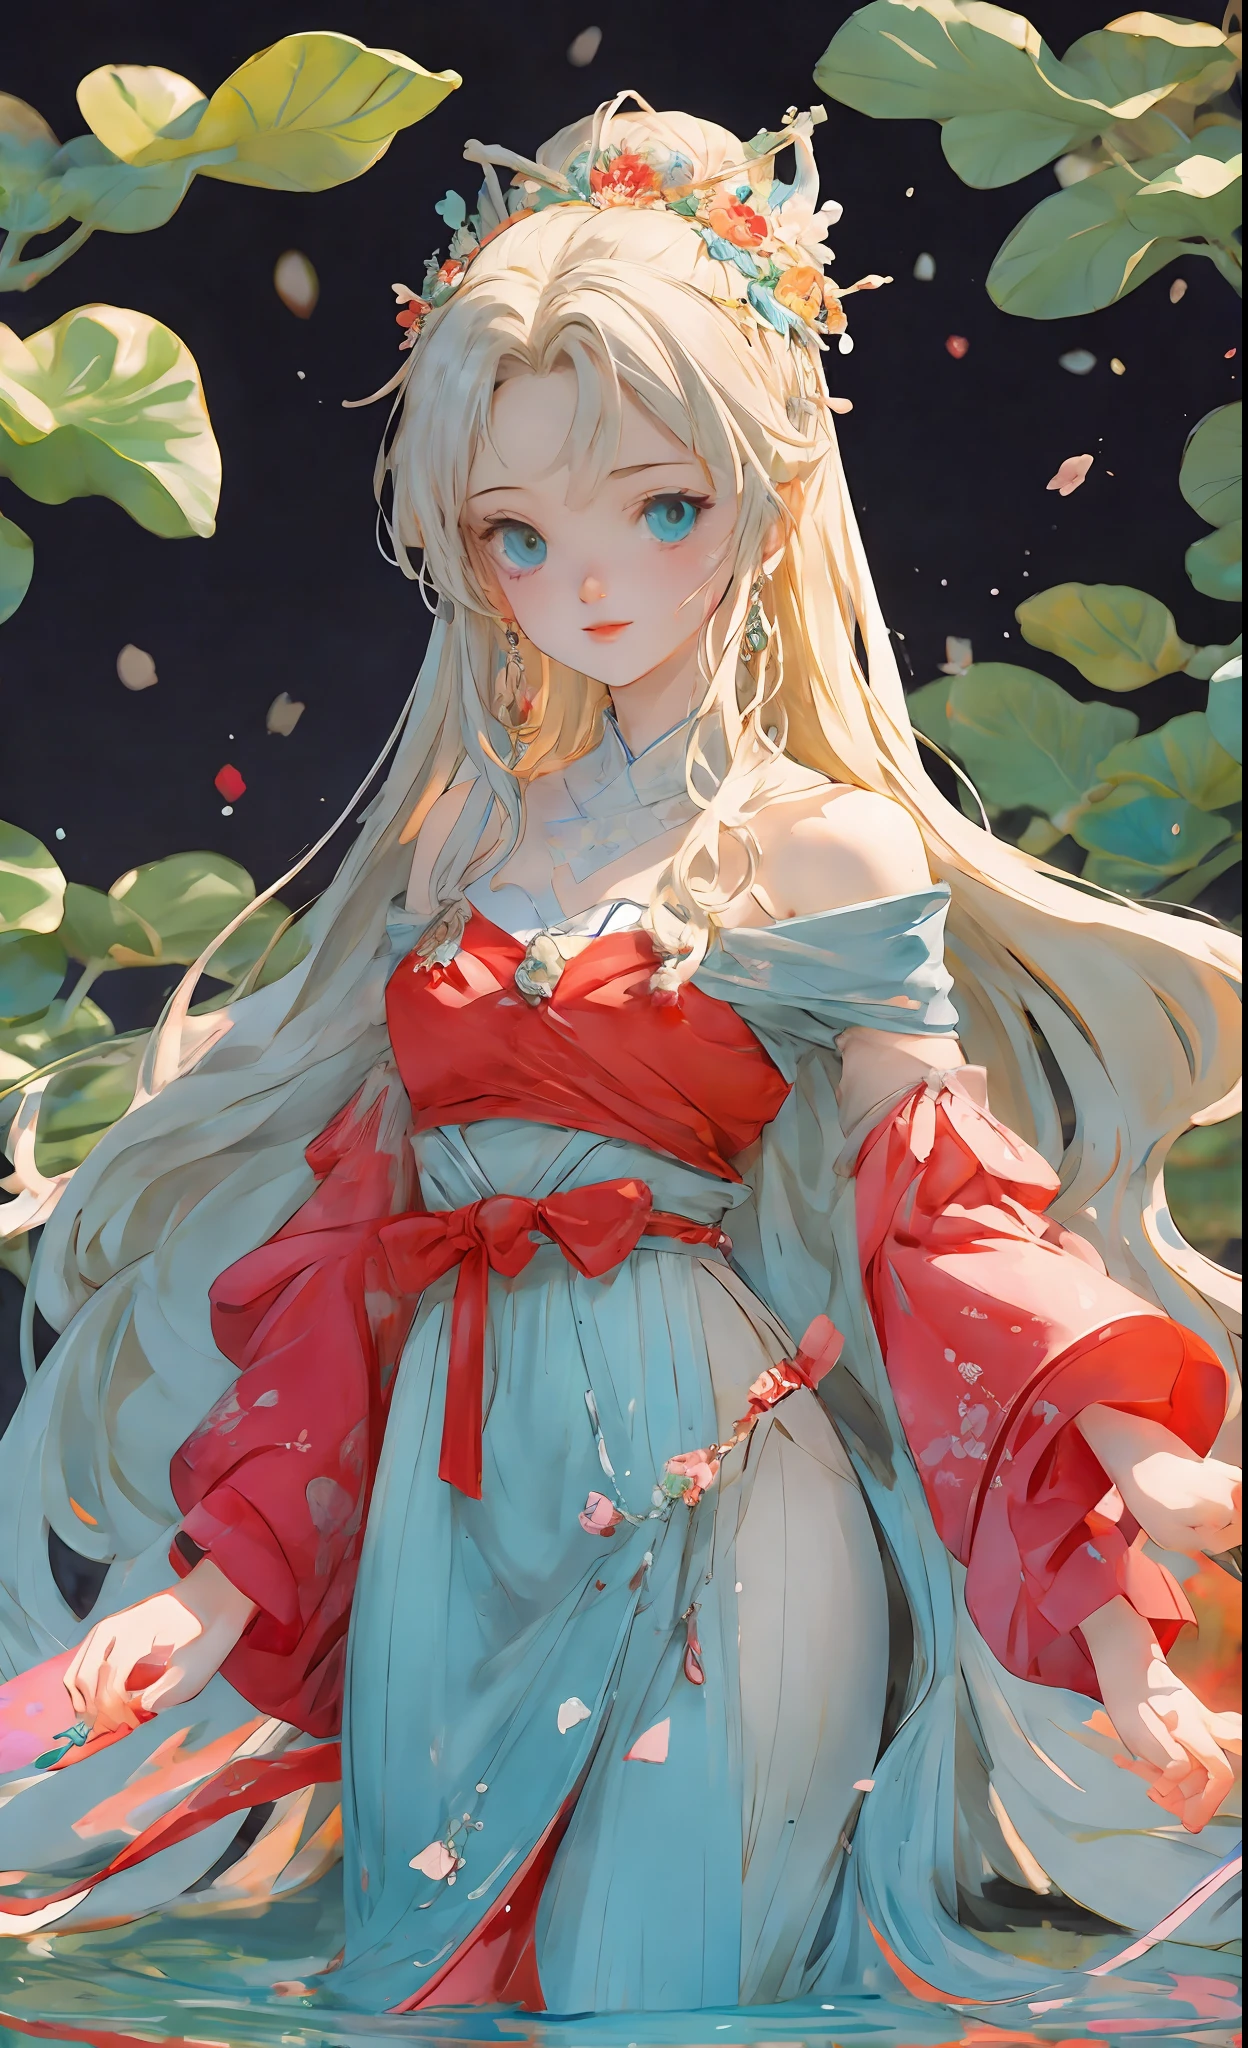 Cold facial features, high nose bridge, slender eyes, hanging eyes, adult female, thirty-year-old female, serious expression, cold, masterpiece, best quality, official art, 8k wallpaper, very detailed, a girl, ancient chinese clothing, full body, sunlight, clear face, clean white background, masterpiece, super detail, epic composition, ultra hd, high quality, extremely detailed, official art, uniform 8k wallpaper, super detail, 32k red pupils, an extremely delicate and beautiful girl, 8k wallpaper, Best quality, full body close-up, white long dress, luxurious silky bright red chiffon flood (illusion, glitter, ultra-thin, soft,) Hanfu illustration, 1 girl, sky blue hair, long hair, detailed eyes, Forrest Gump, bare shoulders, Hanfu, lake, pure, soft smile, bamboo, tea, high quality, masterpiece, masterpiece, exquisite facial features, delicate hair, delicate eyes, delicate colored hair, 4K picture quality, brilliant light and shadow, Tyndall effect, halo, messy hair, youthful state, gorgeous scene, exquisite clothes, chains , feathers, big eyes of ancient Chinese beauties very detailed, digital painting, artstation, concept art, clear focus, illustration, art by Greg Rutkowski and Alphonse Mucha and Victo ngai